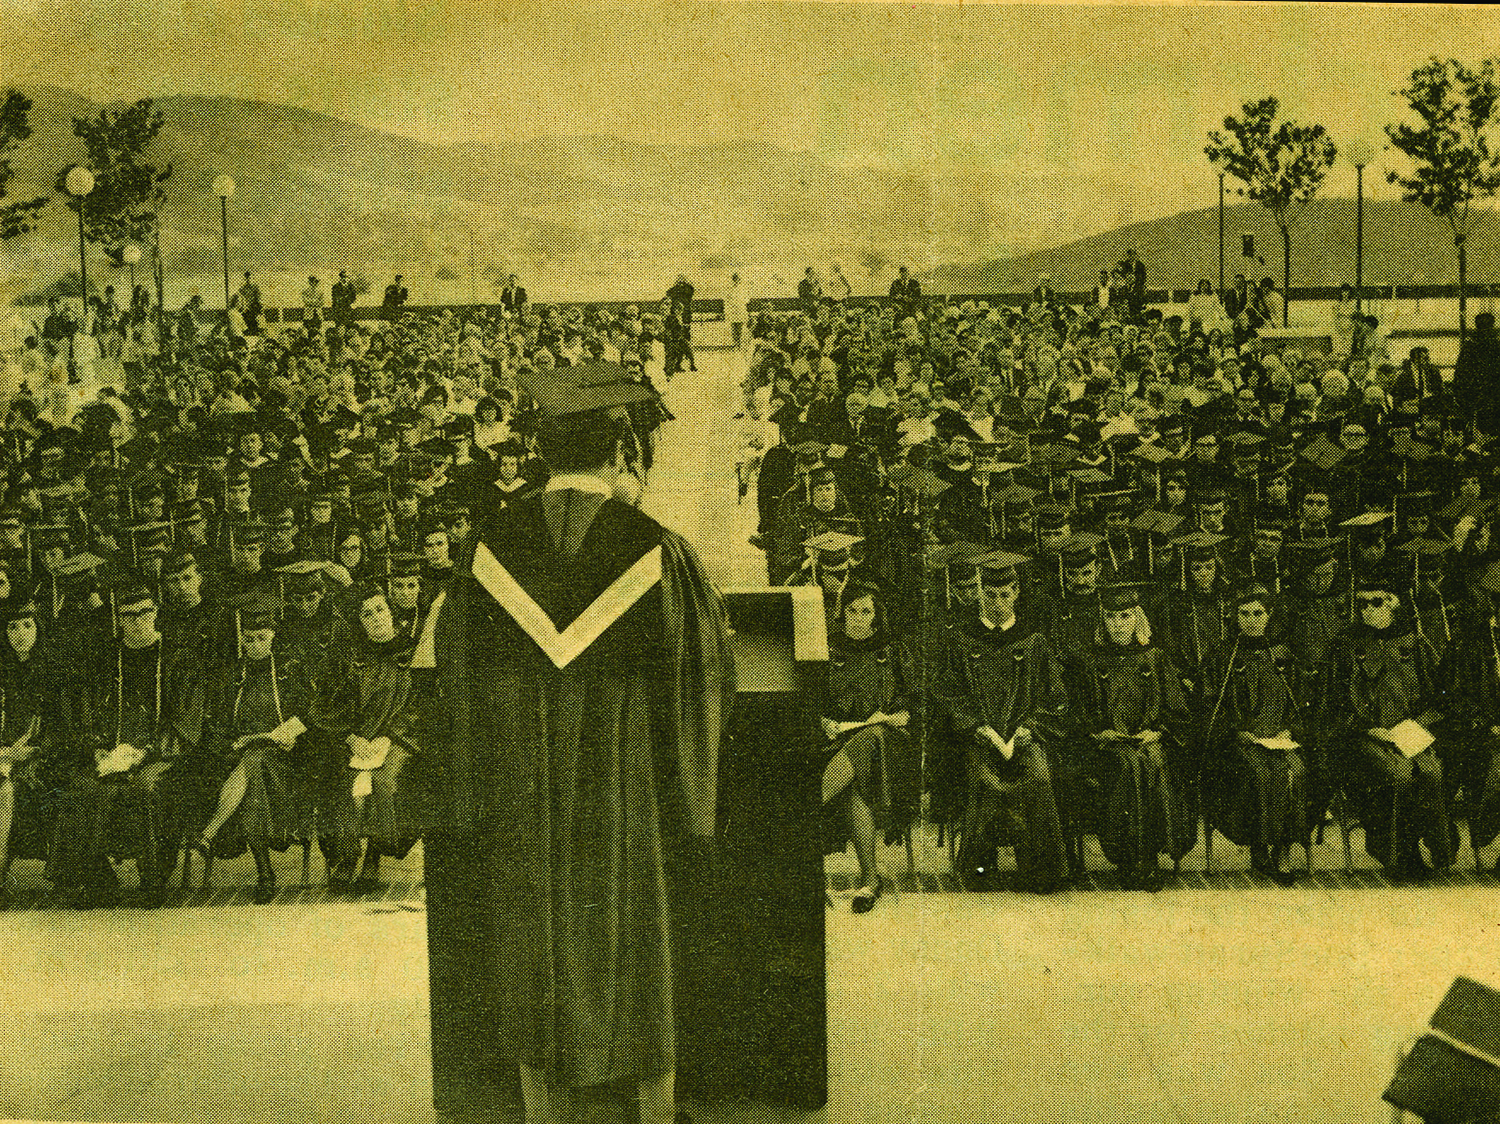 Vintage image of MC students from the graduation in '60s